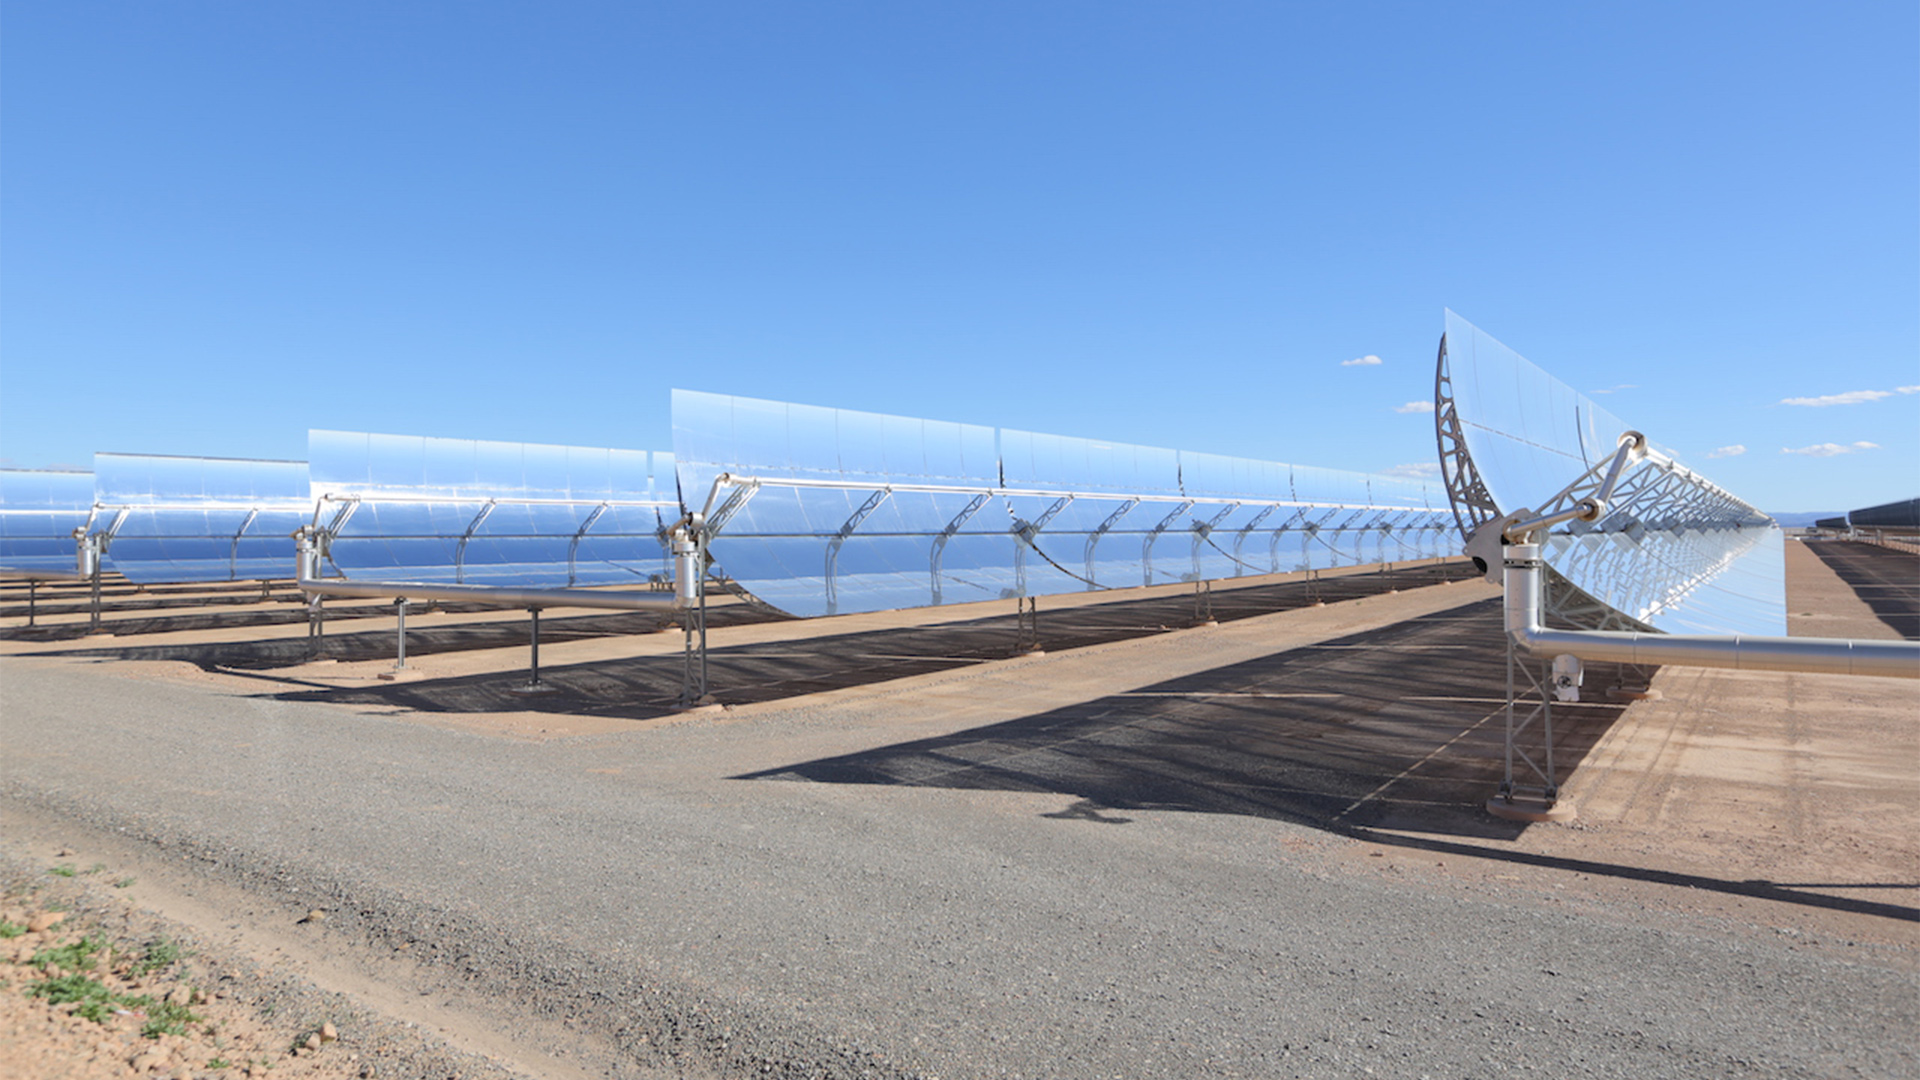 Mirrors of the Noor Complex Concentrated Solar Plant, Morocco